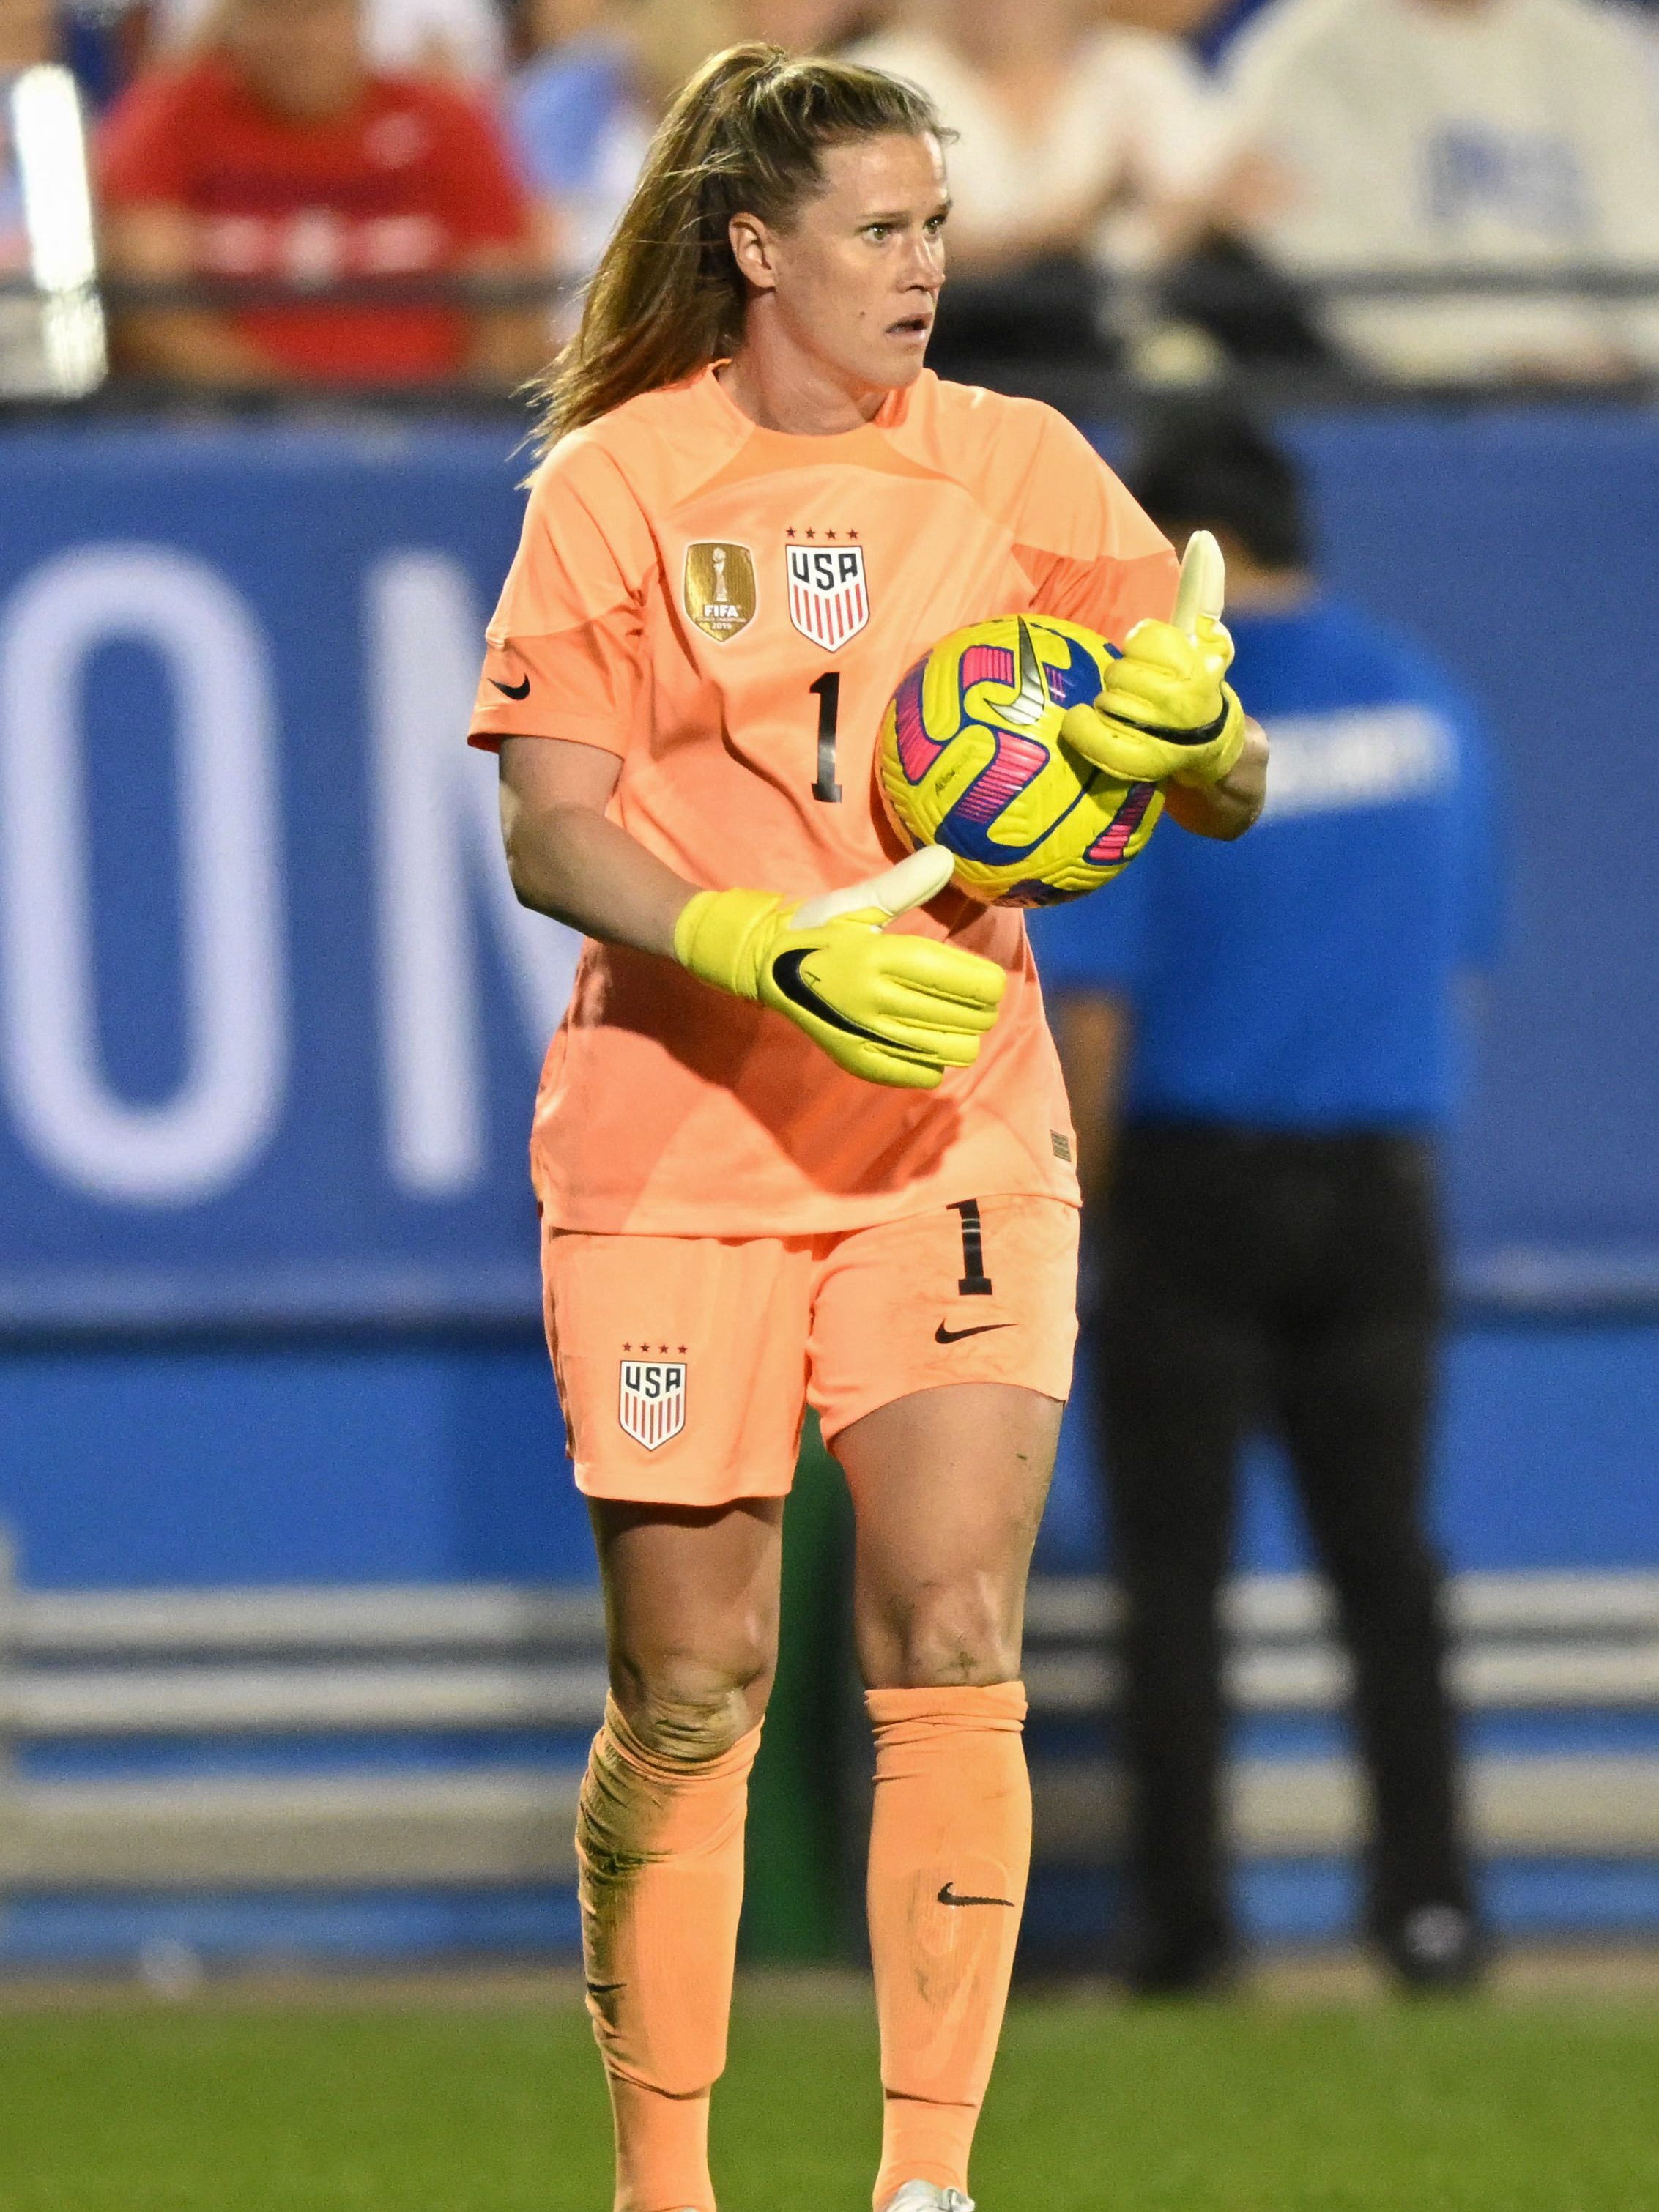 An action image of Alyssa Naeher playing soccer.